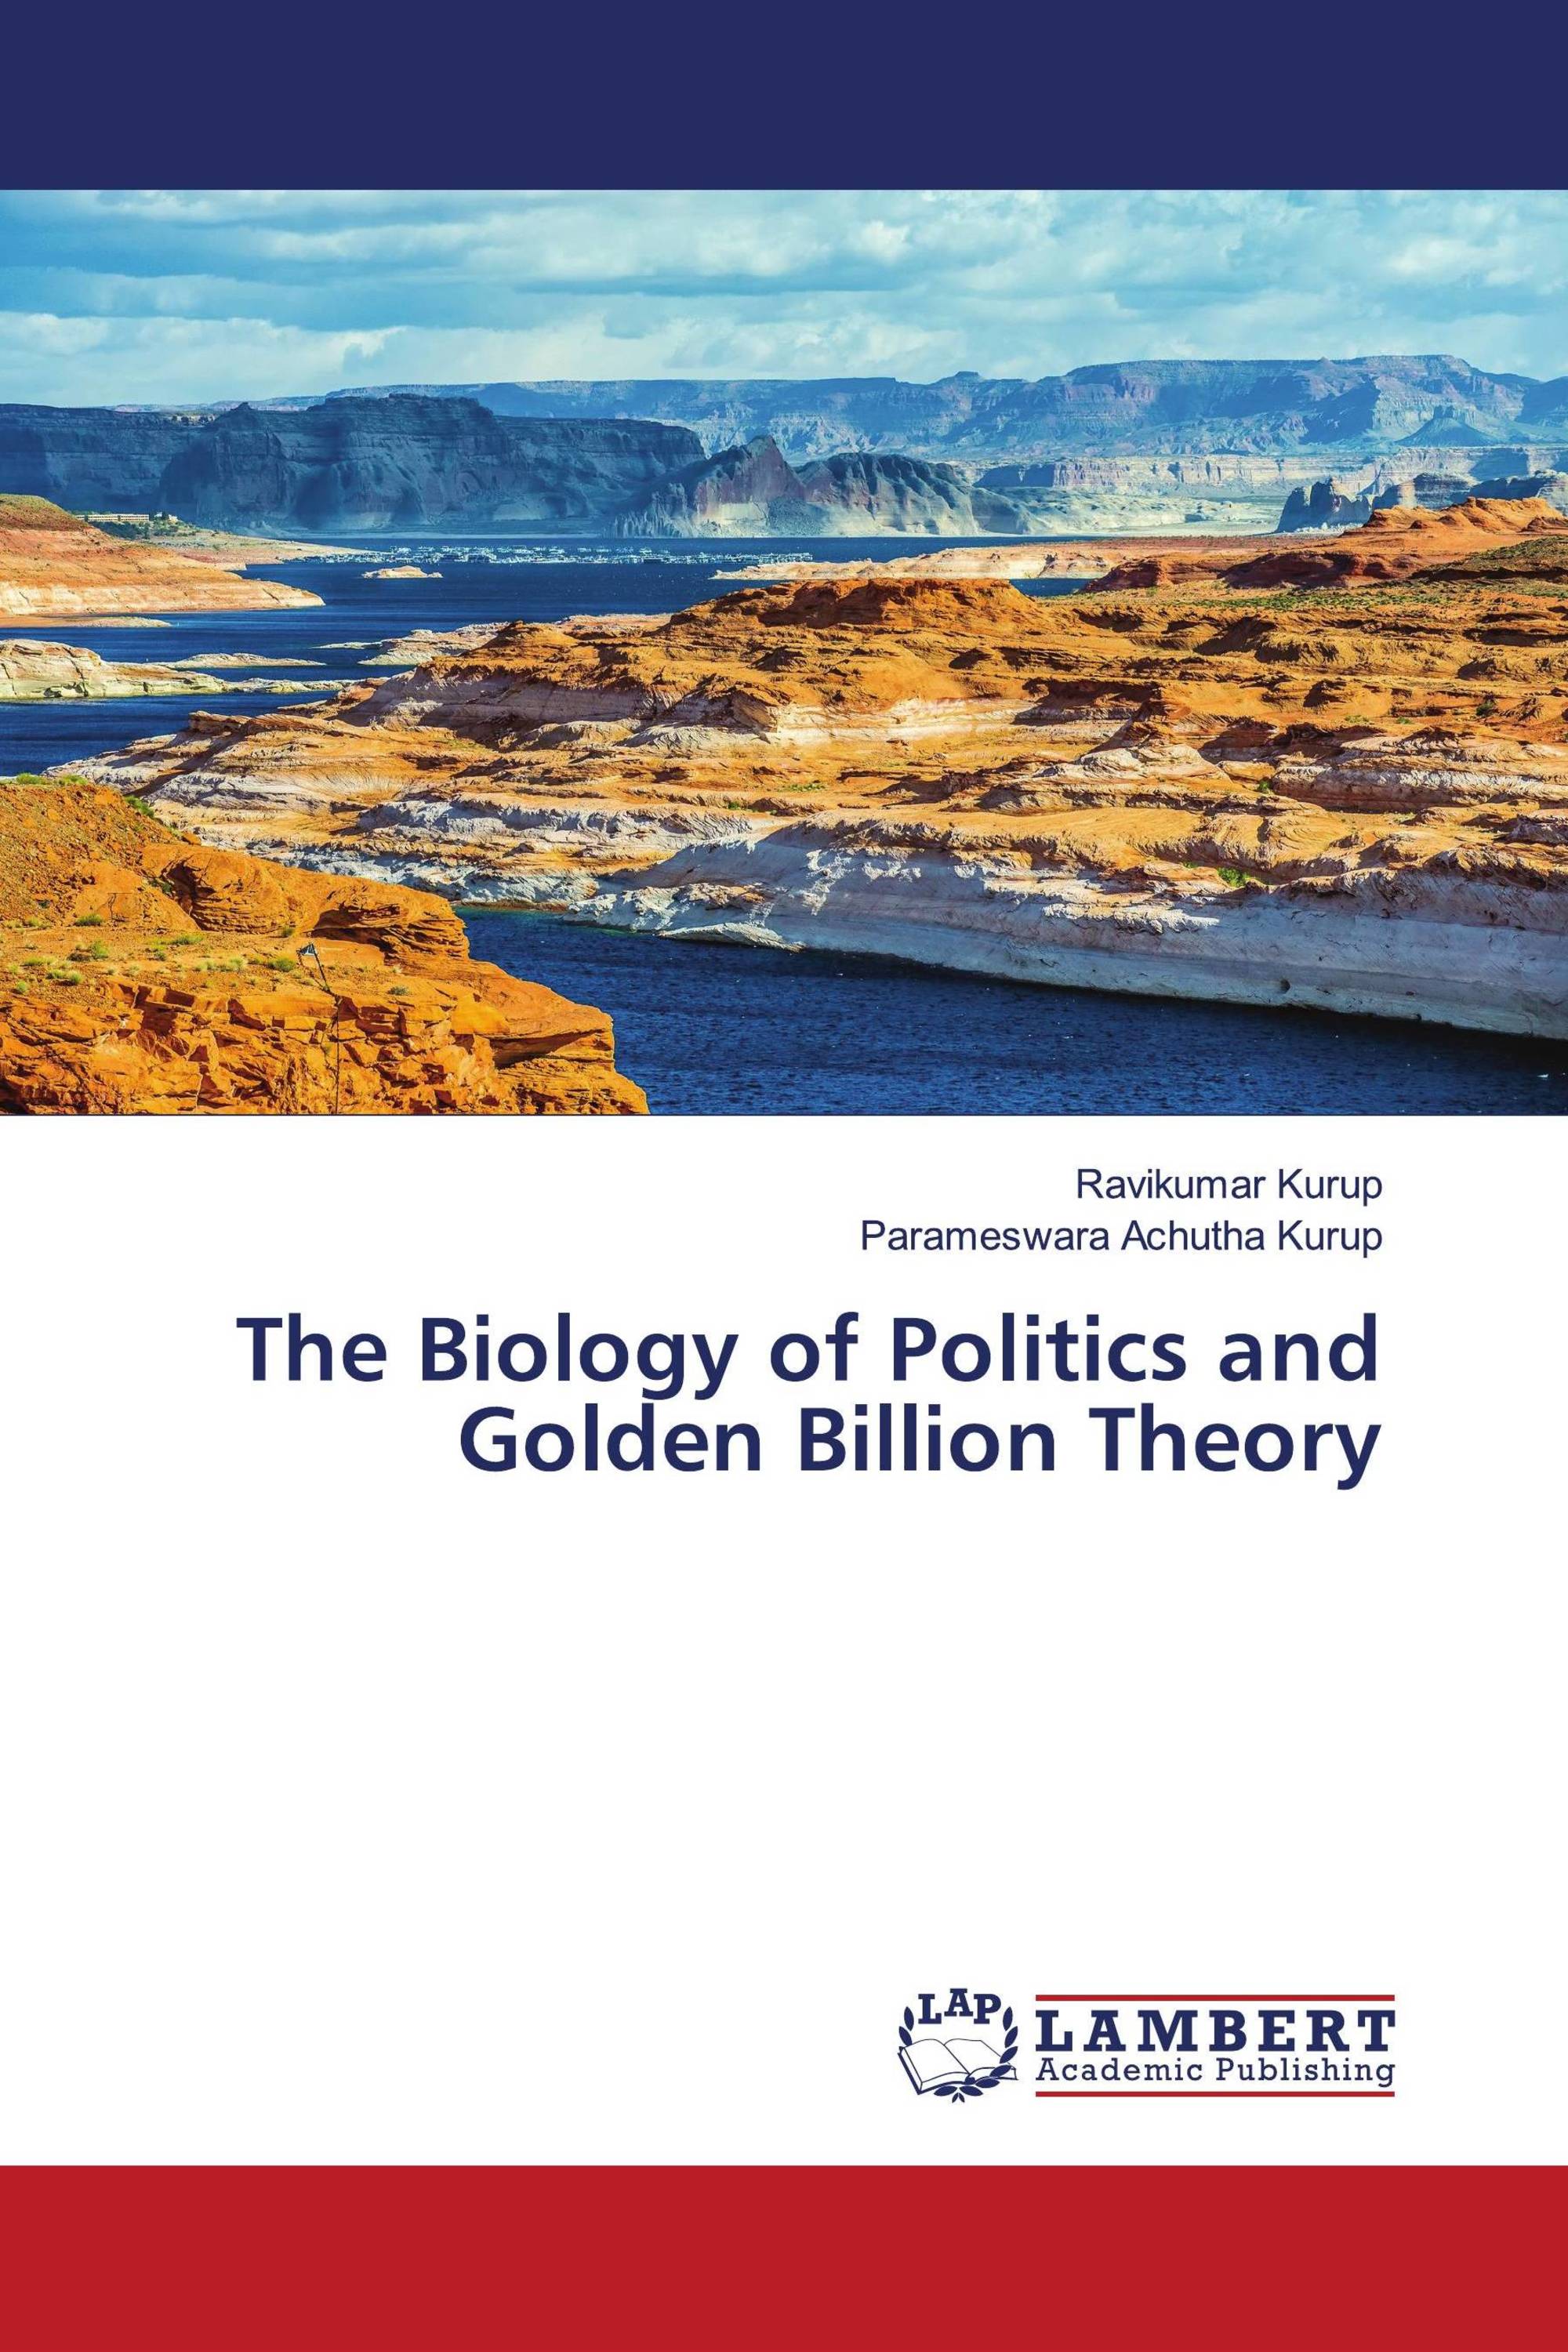 The Biology of Politics and Golden Billion Theory